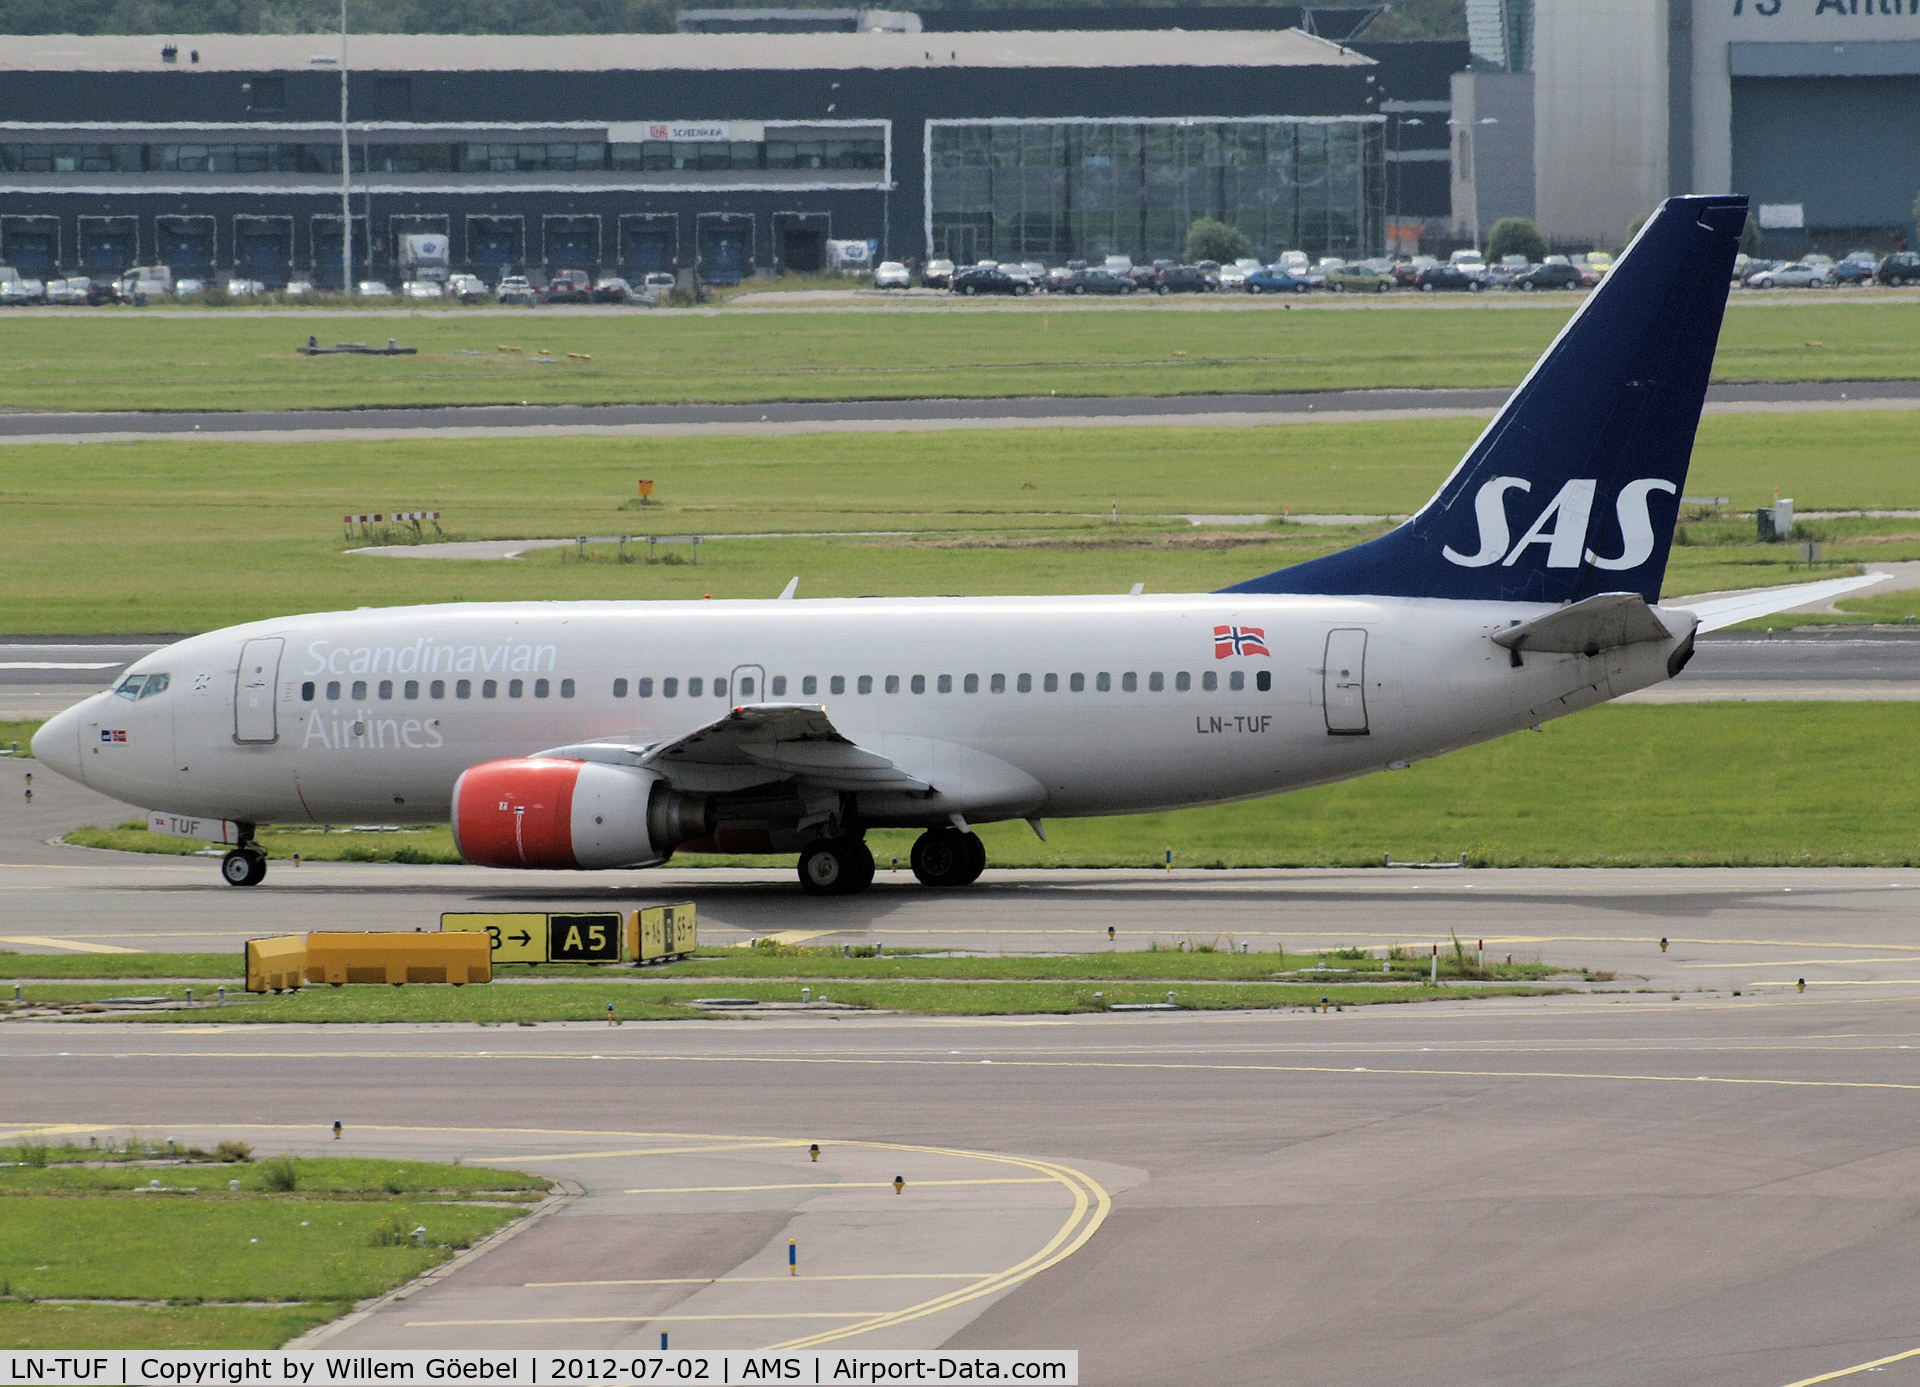 LN-TUF, 1999 Boeing 737-705 C/N 28222, Taxi to runway 24 of Schiphol Airport